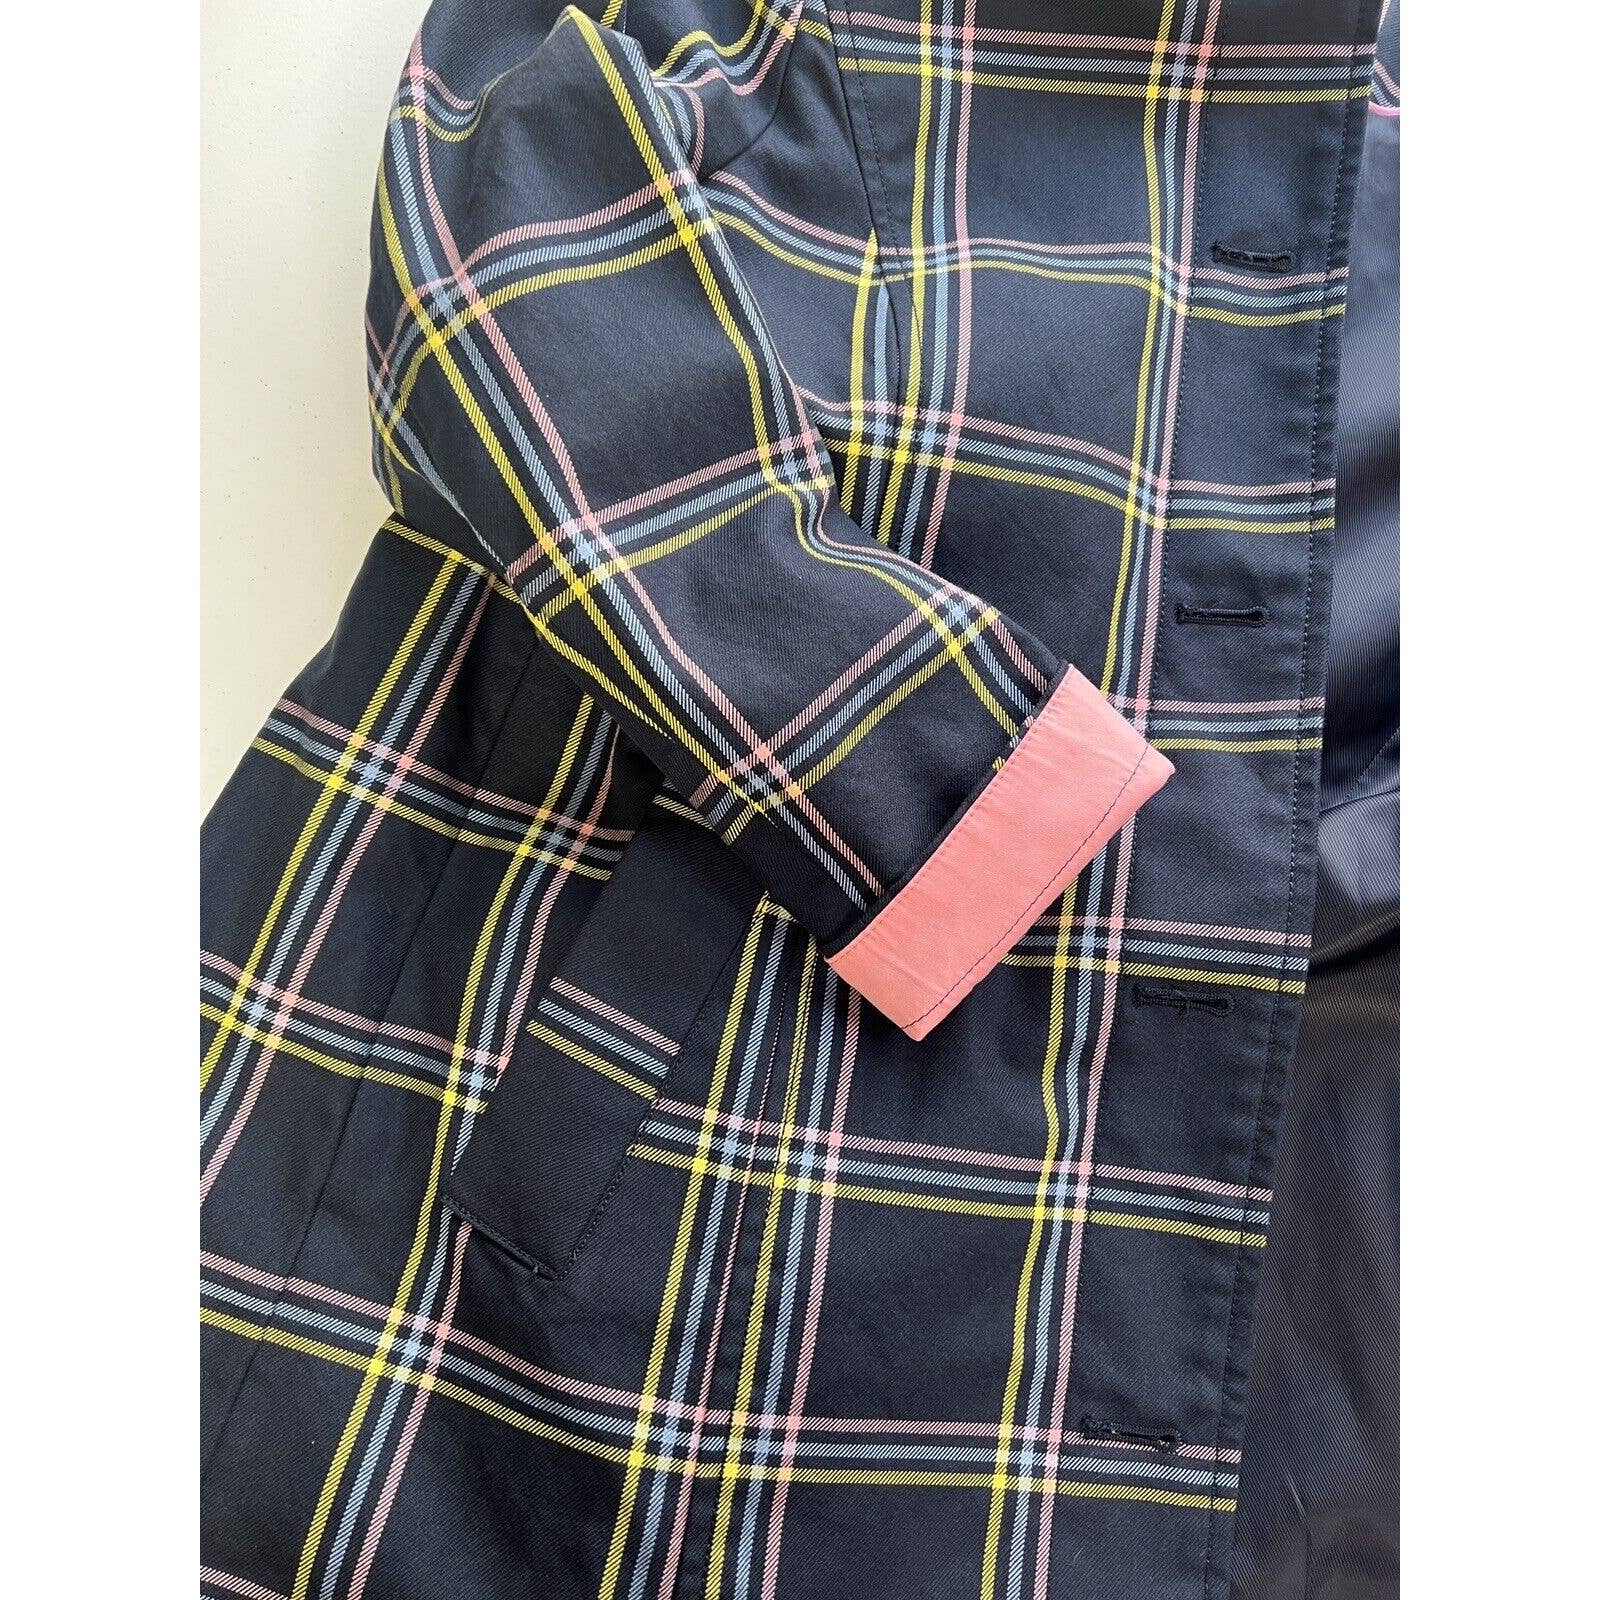 Talbots A Line Plaid Mac Jacket Women’s Small Button Front Navy Trench Coat